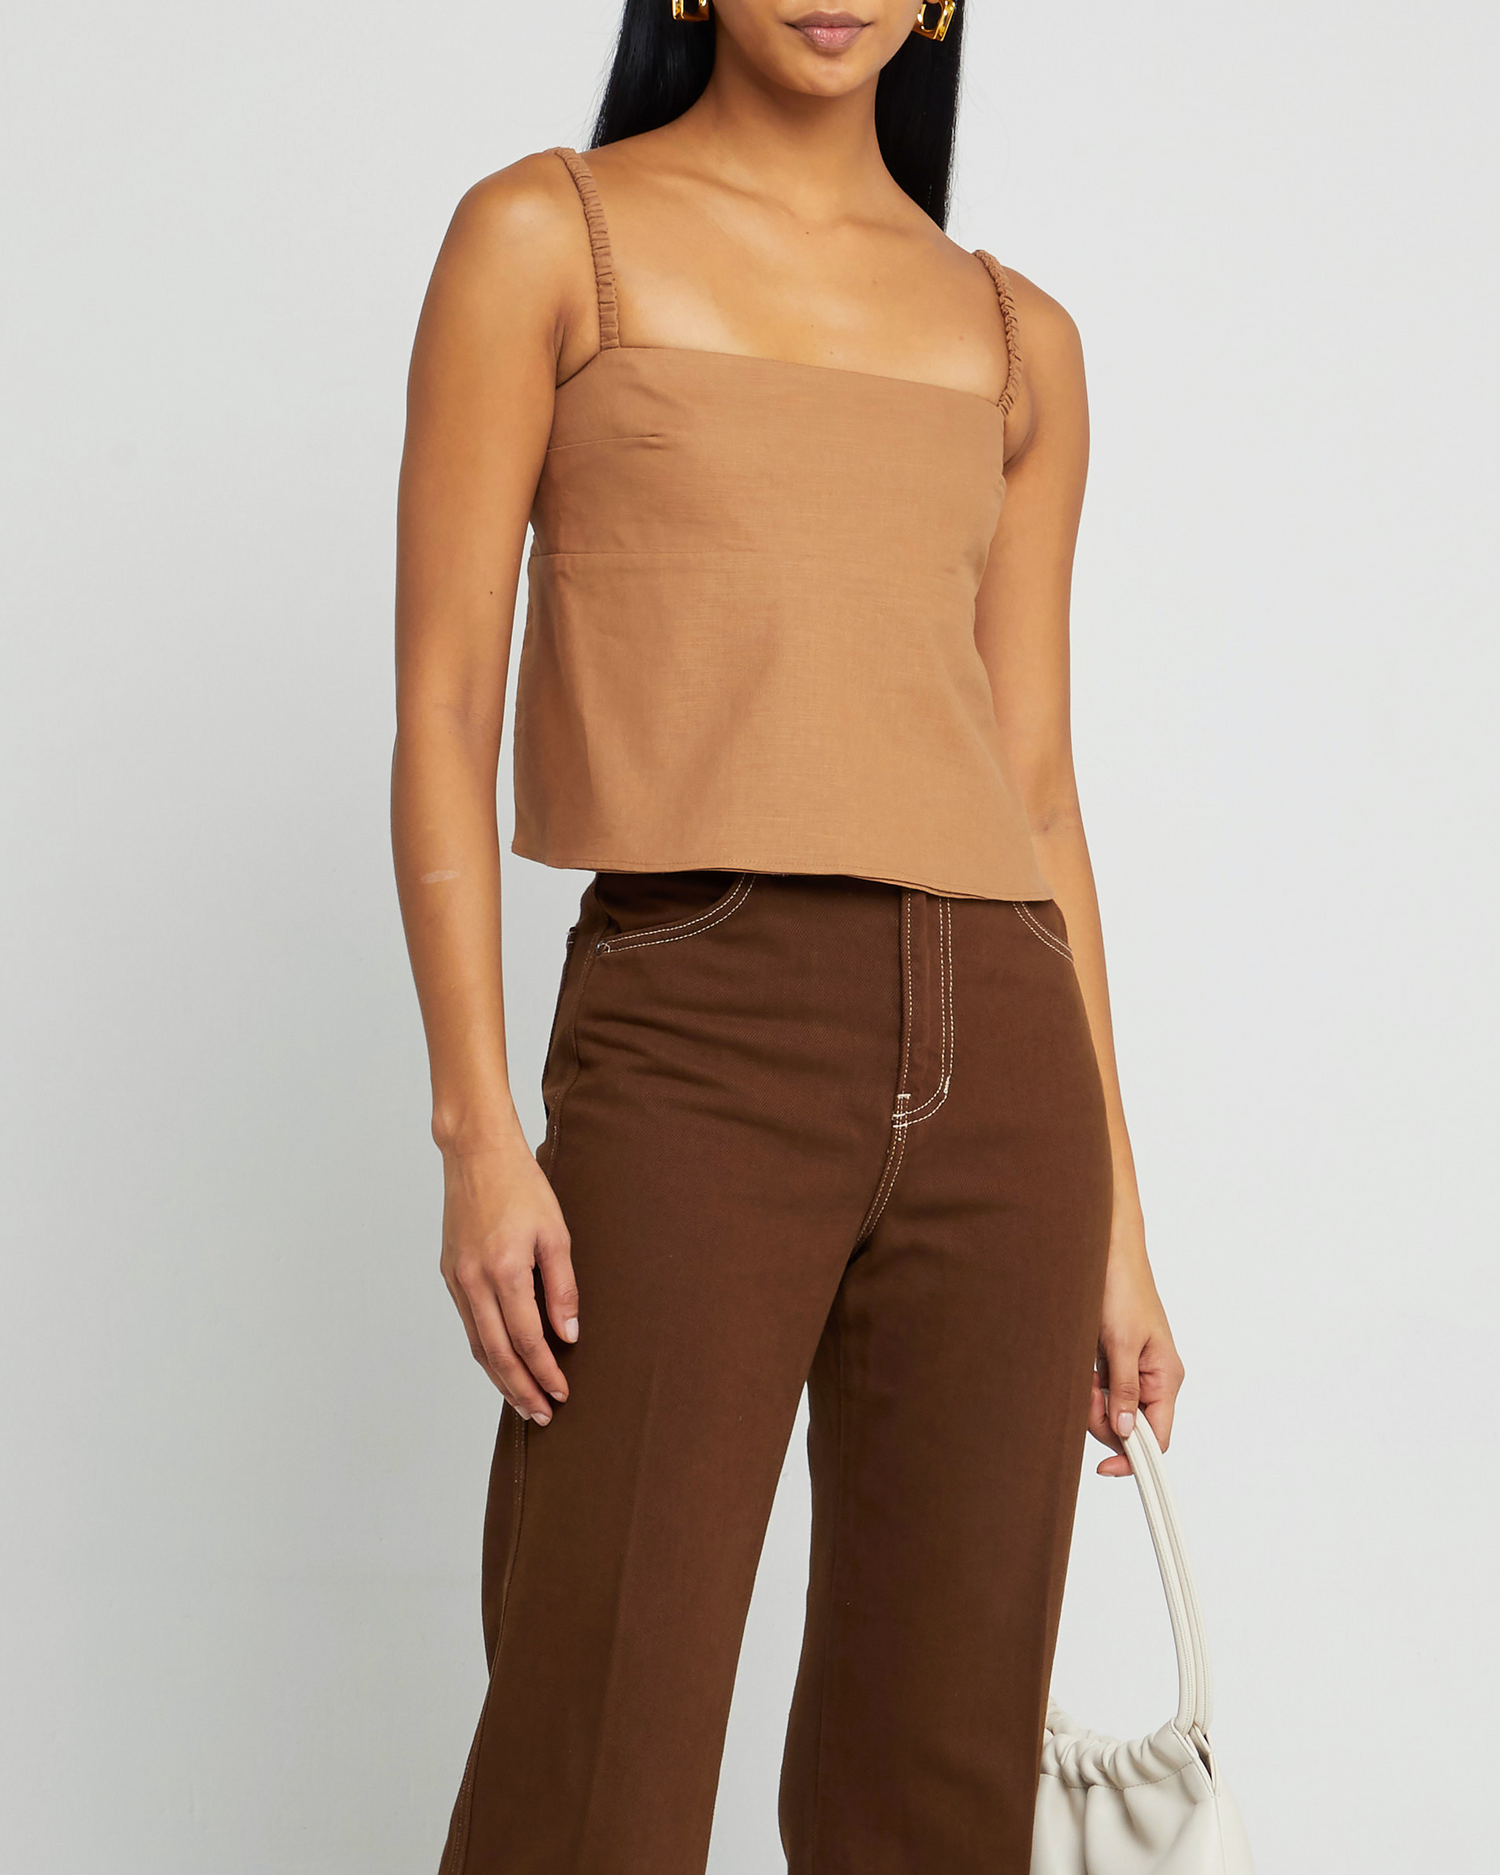 Second image of Carina Tank, a brown sleeveless top, open back, two elastic straps across back, thin elastic straps